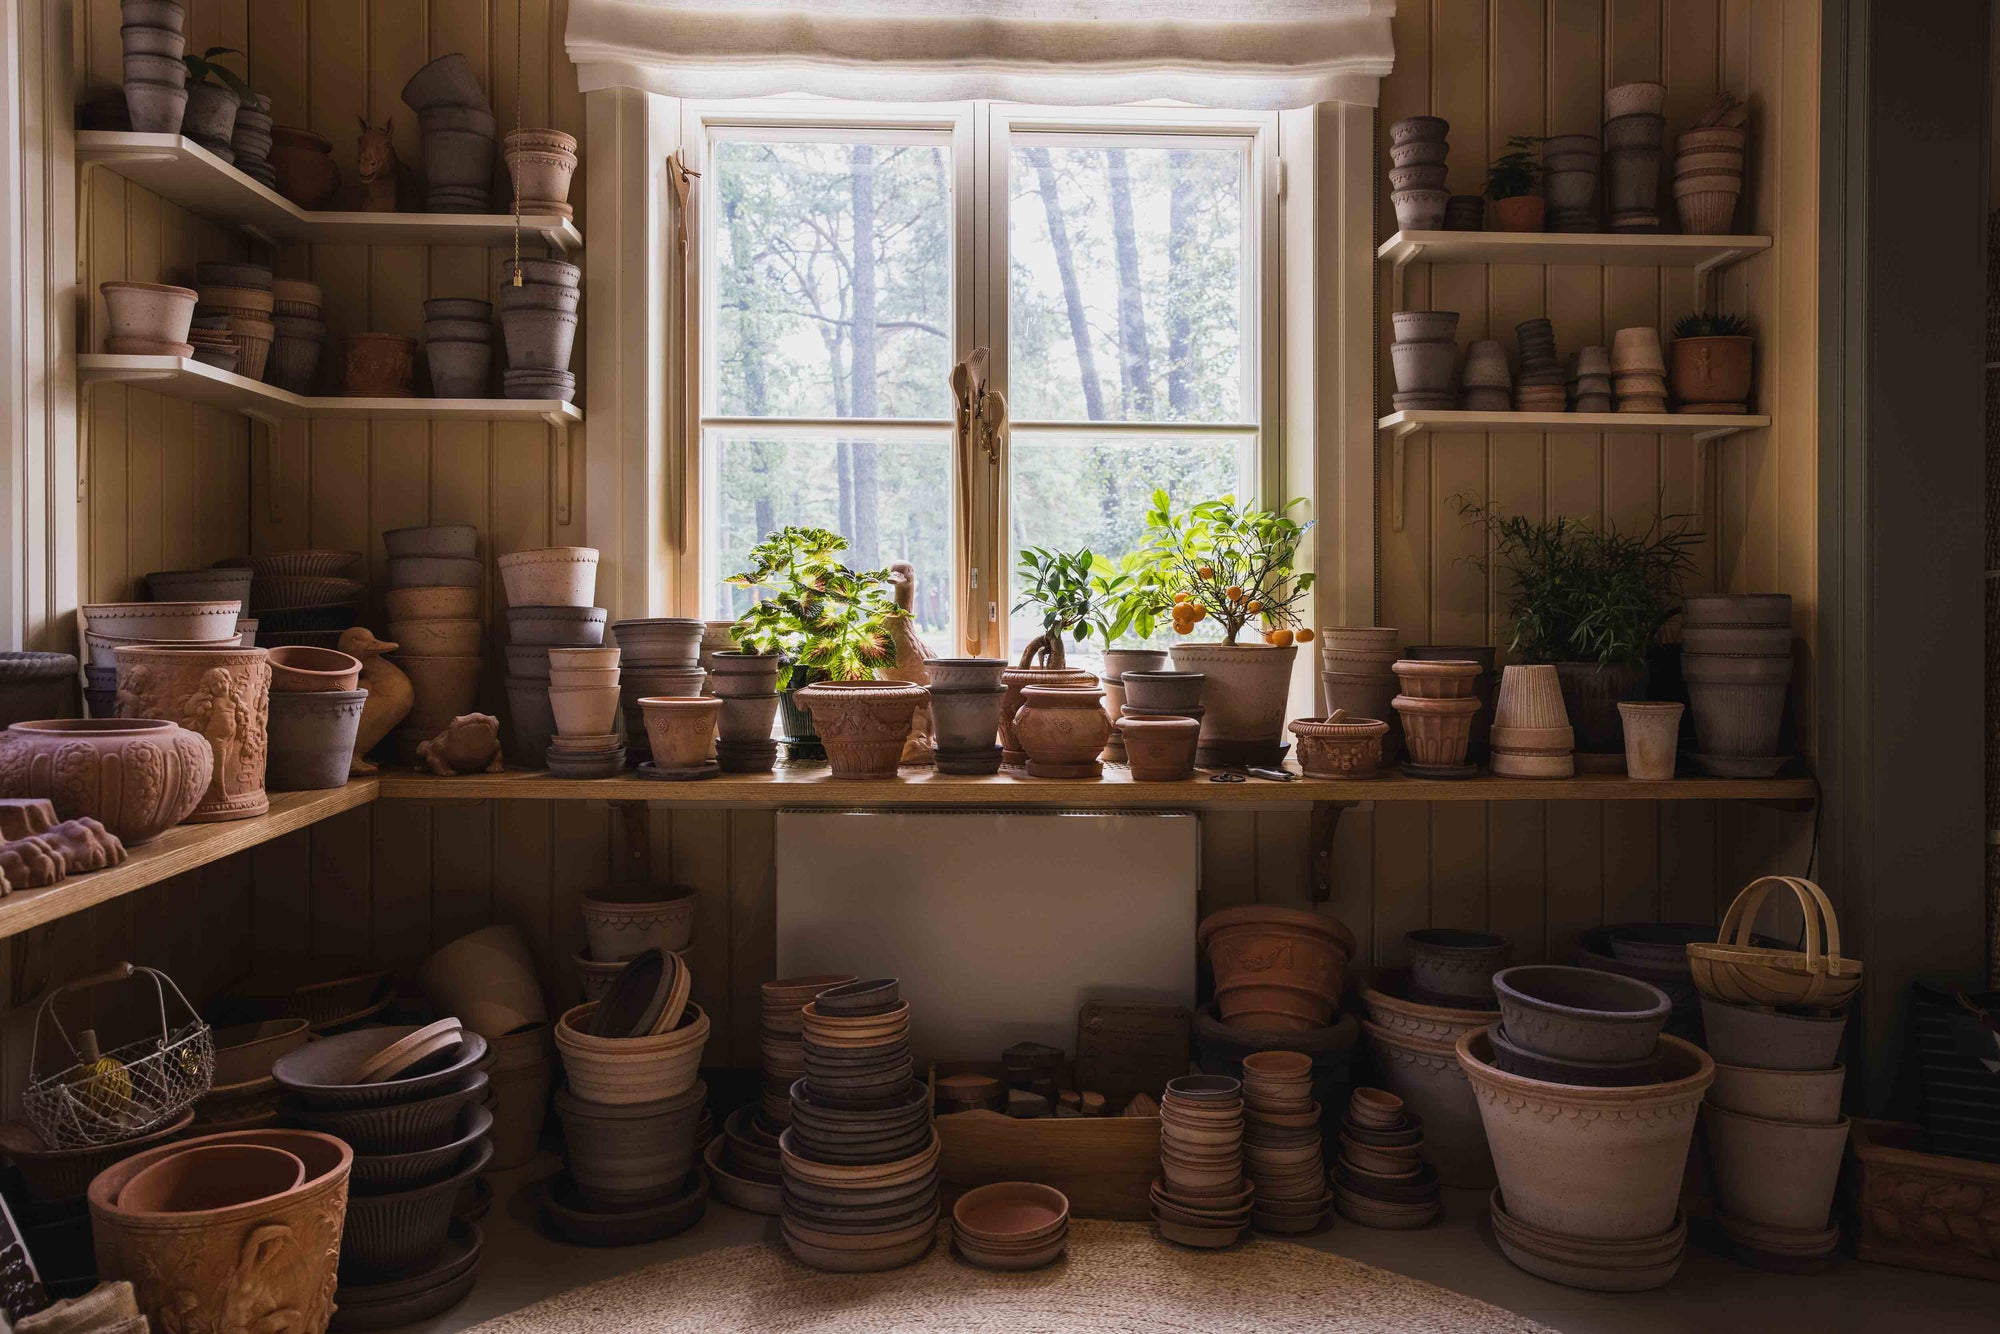 Pottery Days in Hanko on May 25th!